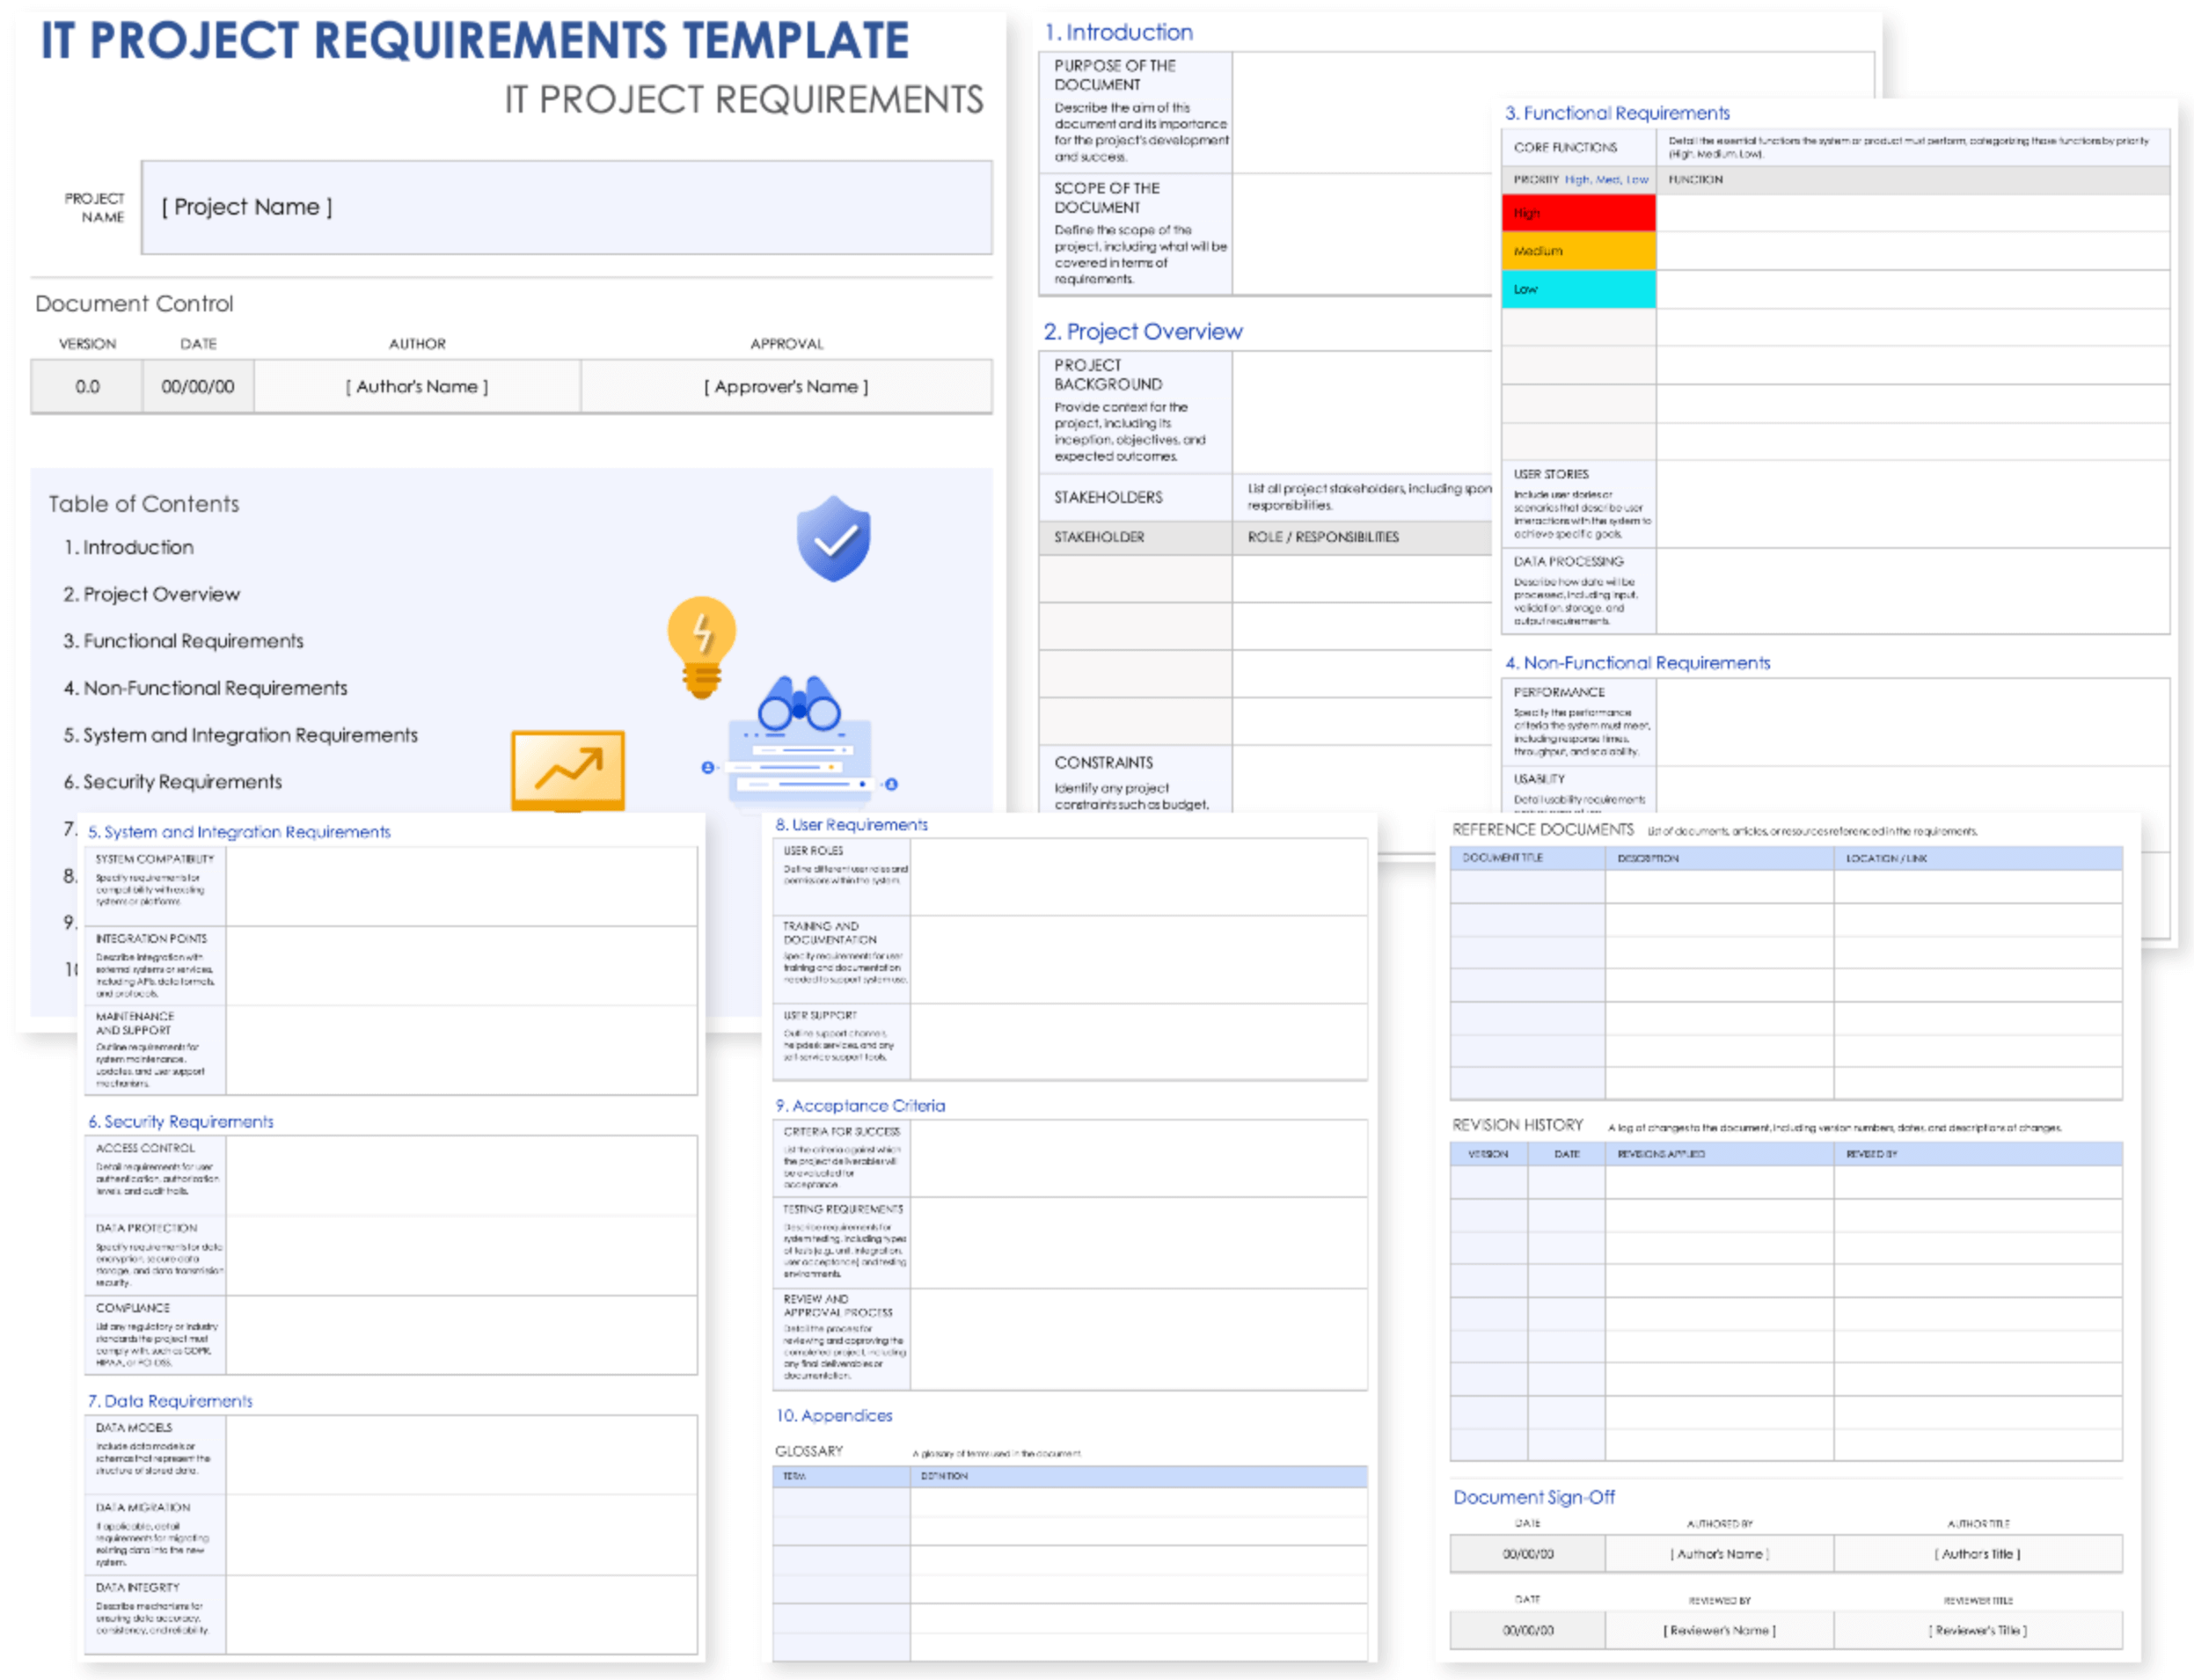 IT Project Requirements Template